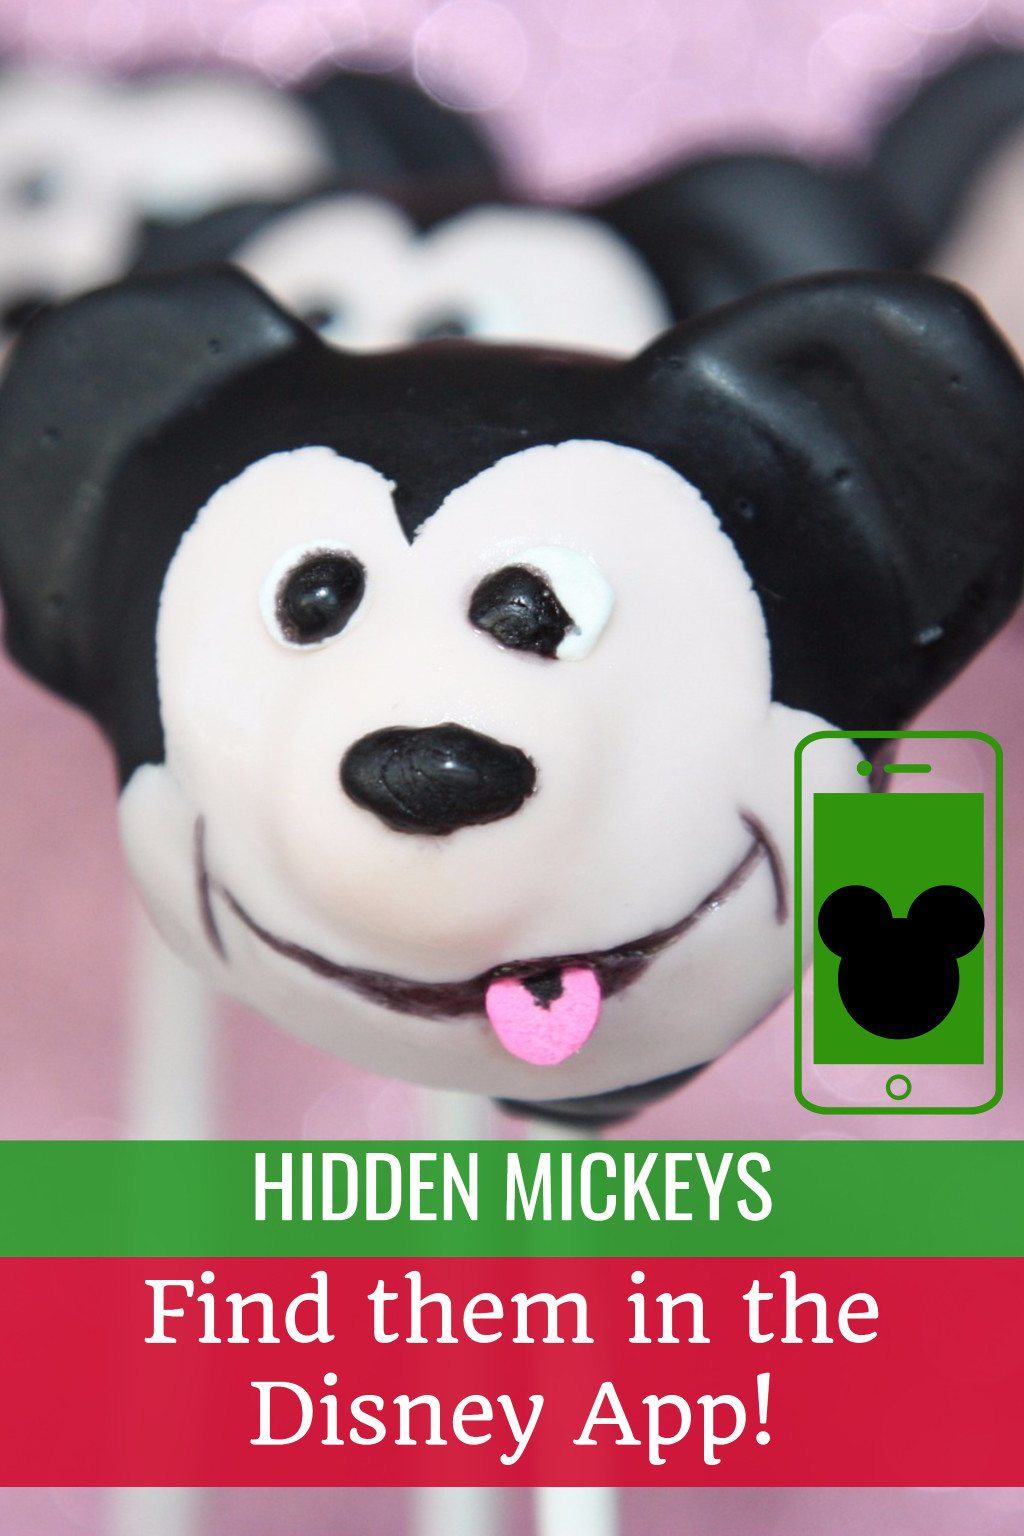 We've been hidden mickey hunting inside the Disney App for Walt Disney World Florida - can you find them too?